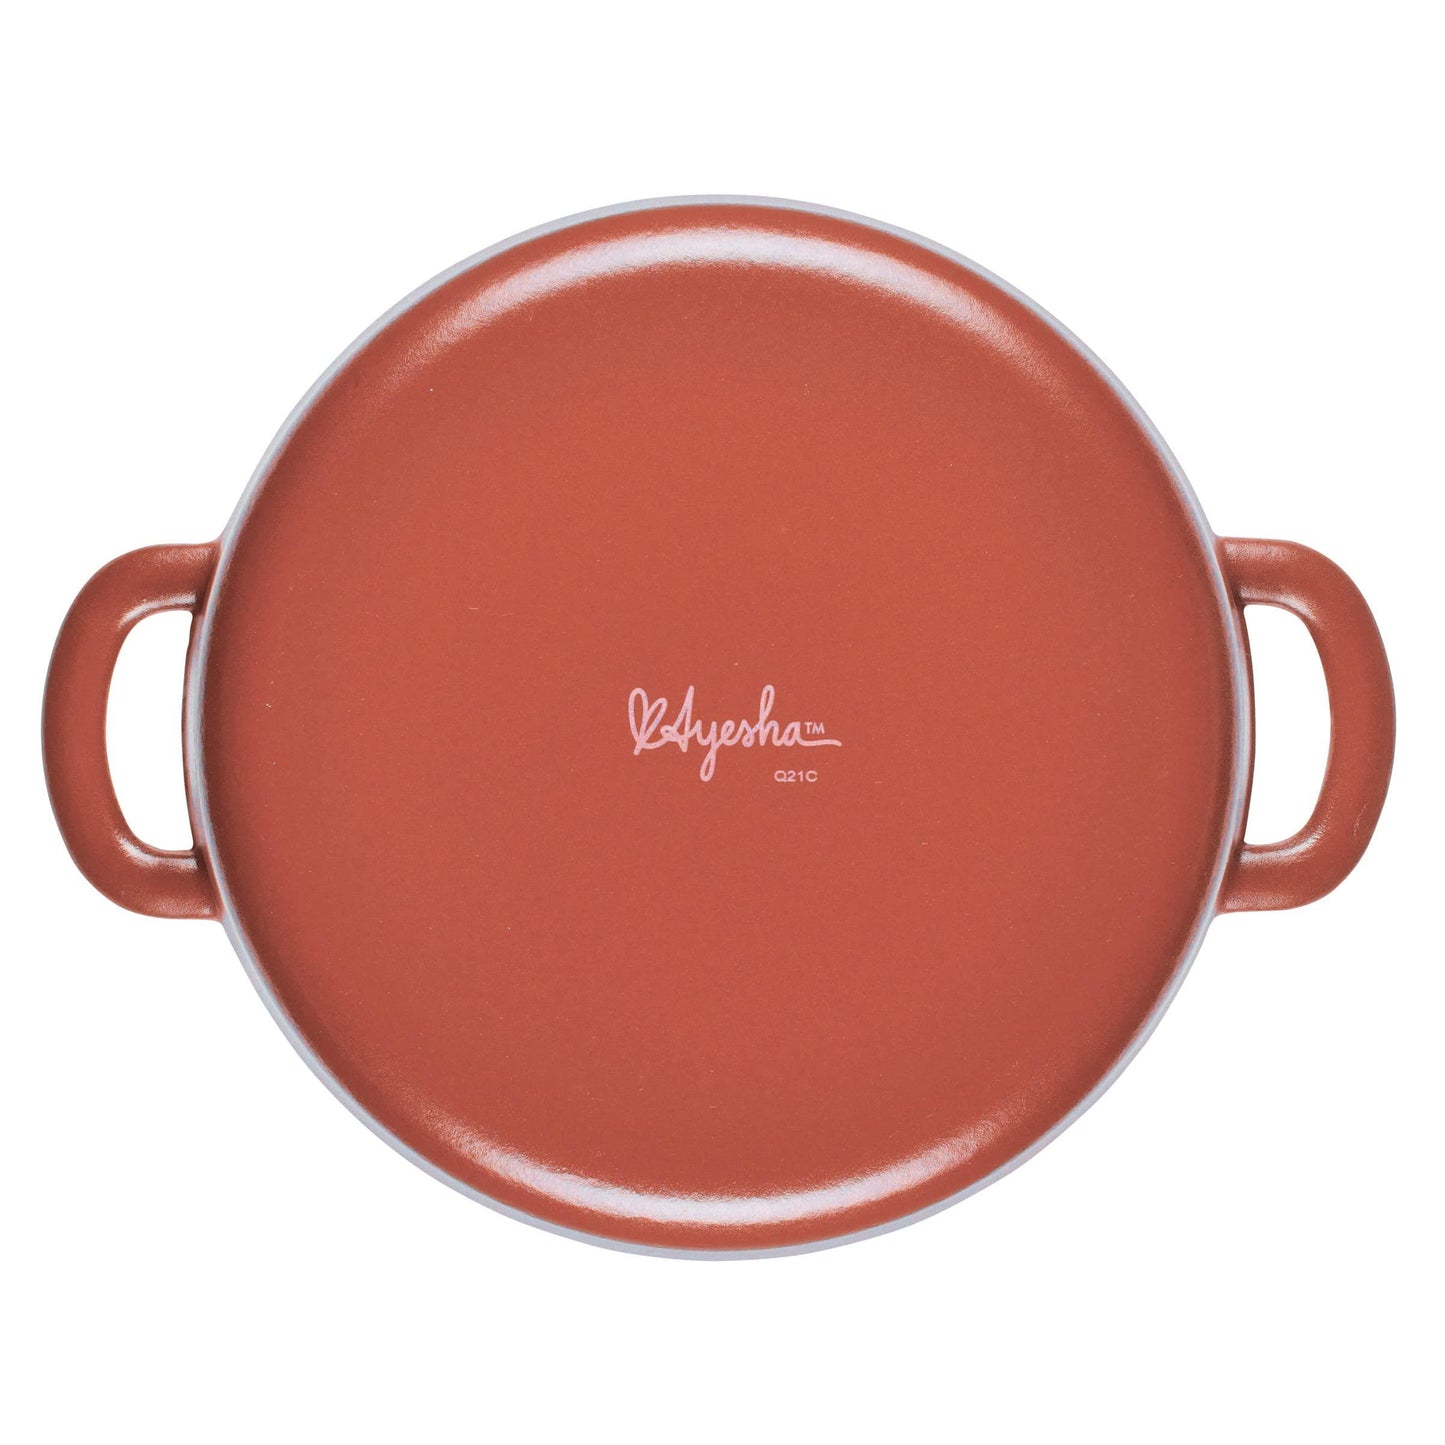 Ayesha Curry Kitchenware Enameled Cast Iron Dutch Oven/Casserole Pot with Lid, 6 Quart, Redwood Red - CookCave